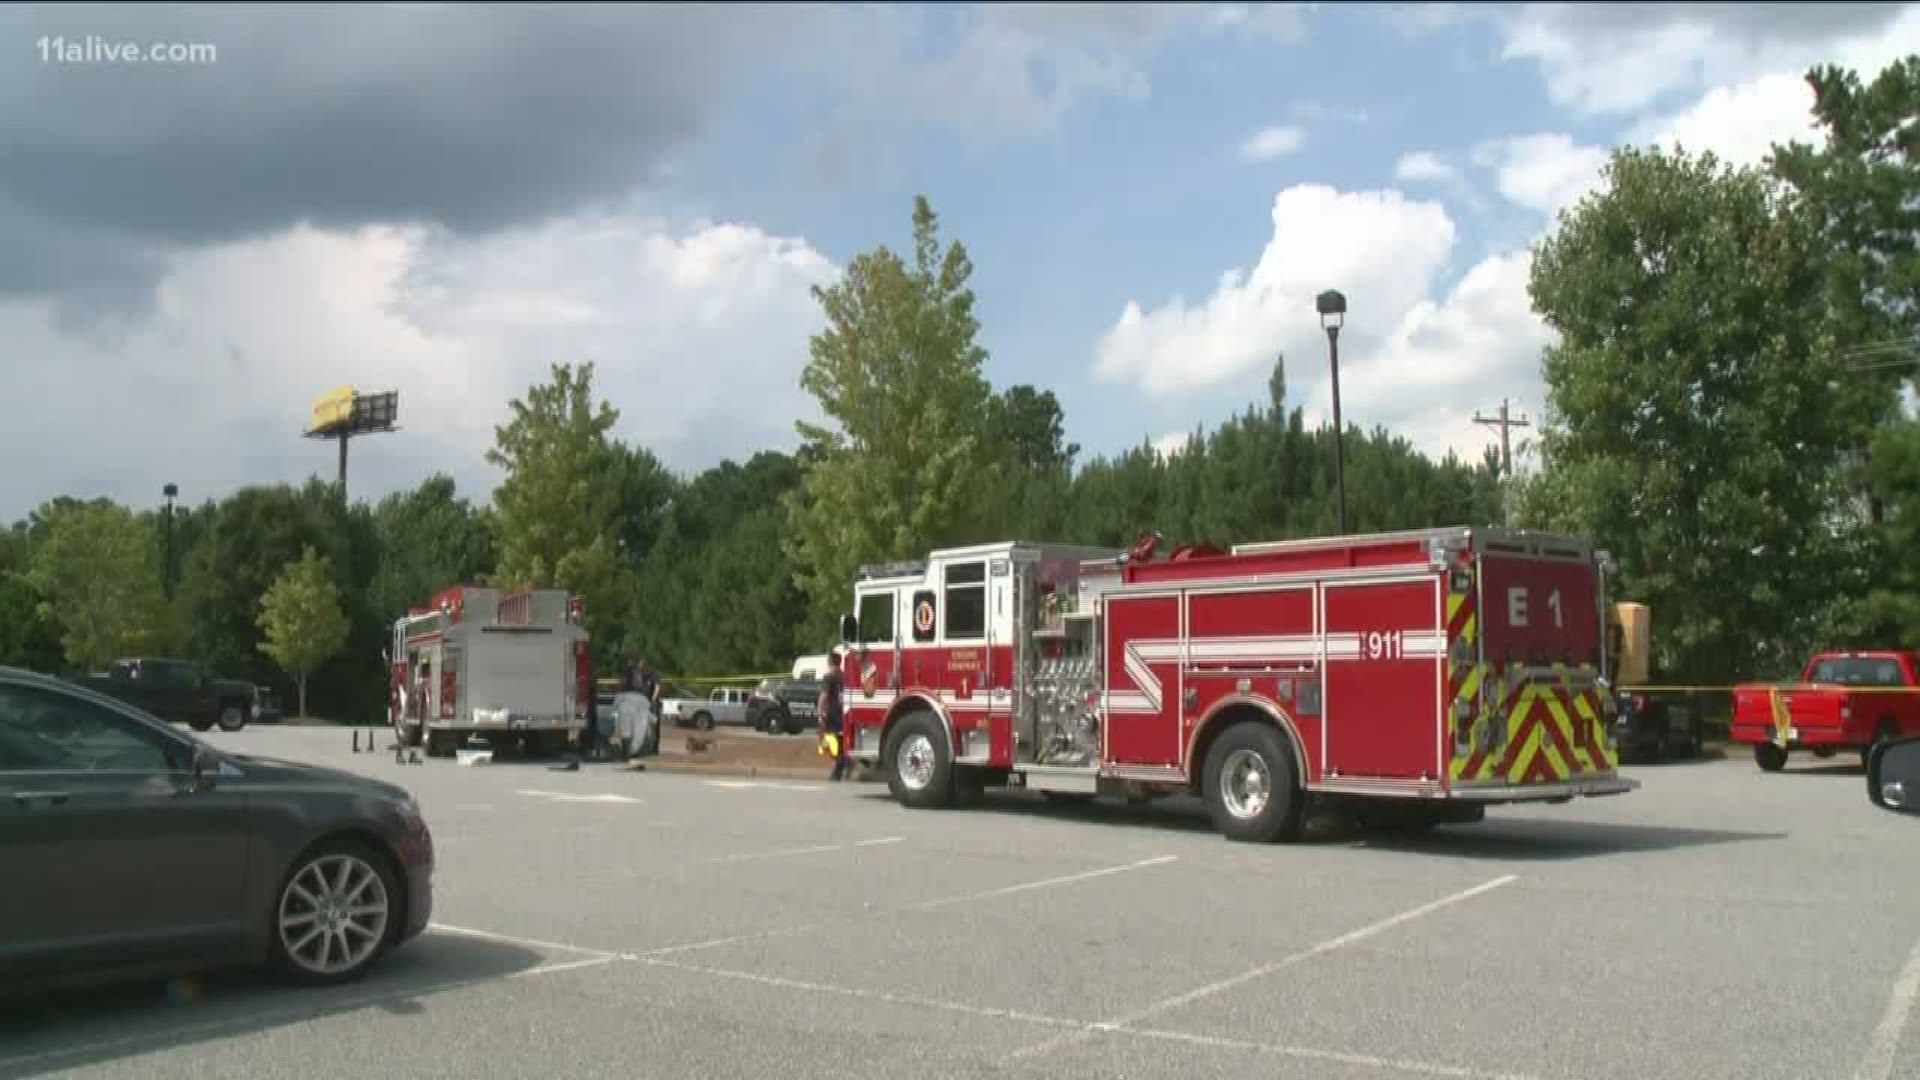 Authorities found a body near a shopping center on Marketplace Boulevard in Cumming on Saturday afternoon. The Forsyth County Coroner said the body has been sent to the GBI for an autopsy.